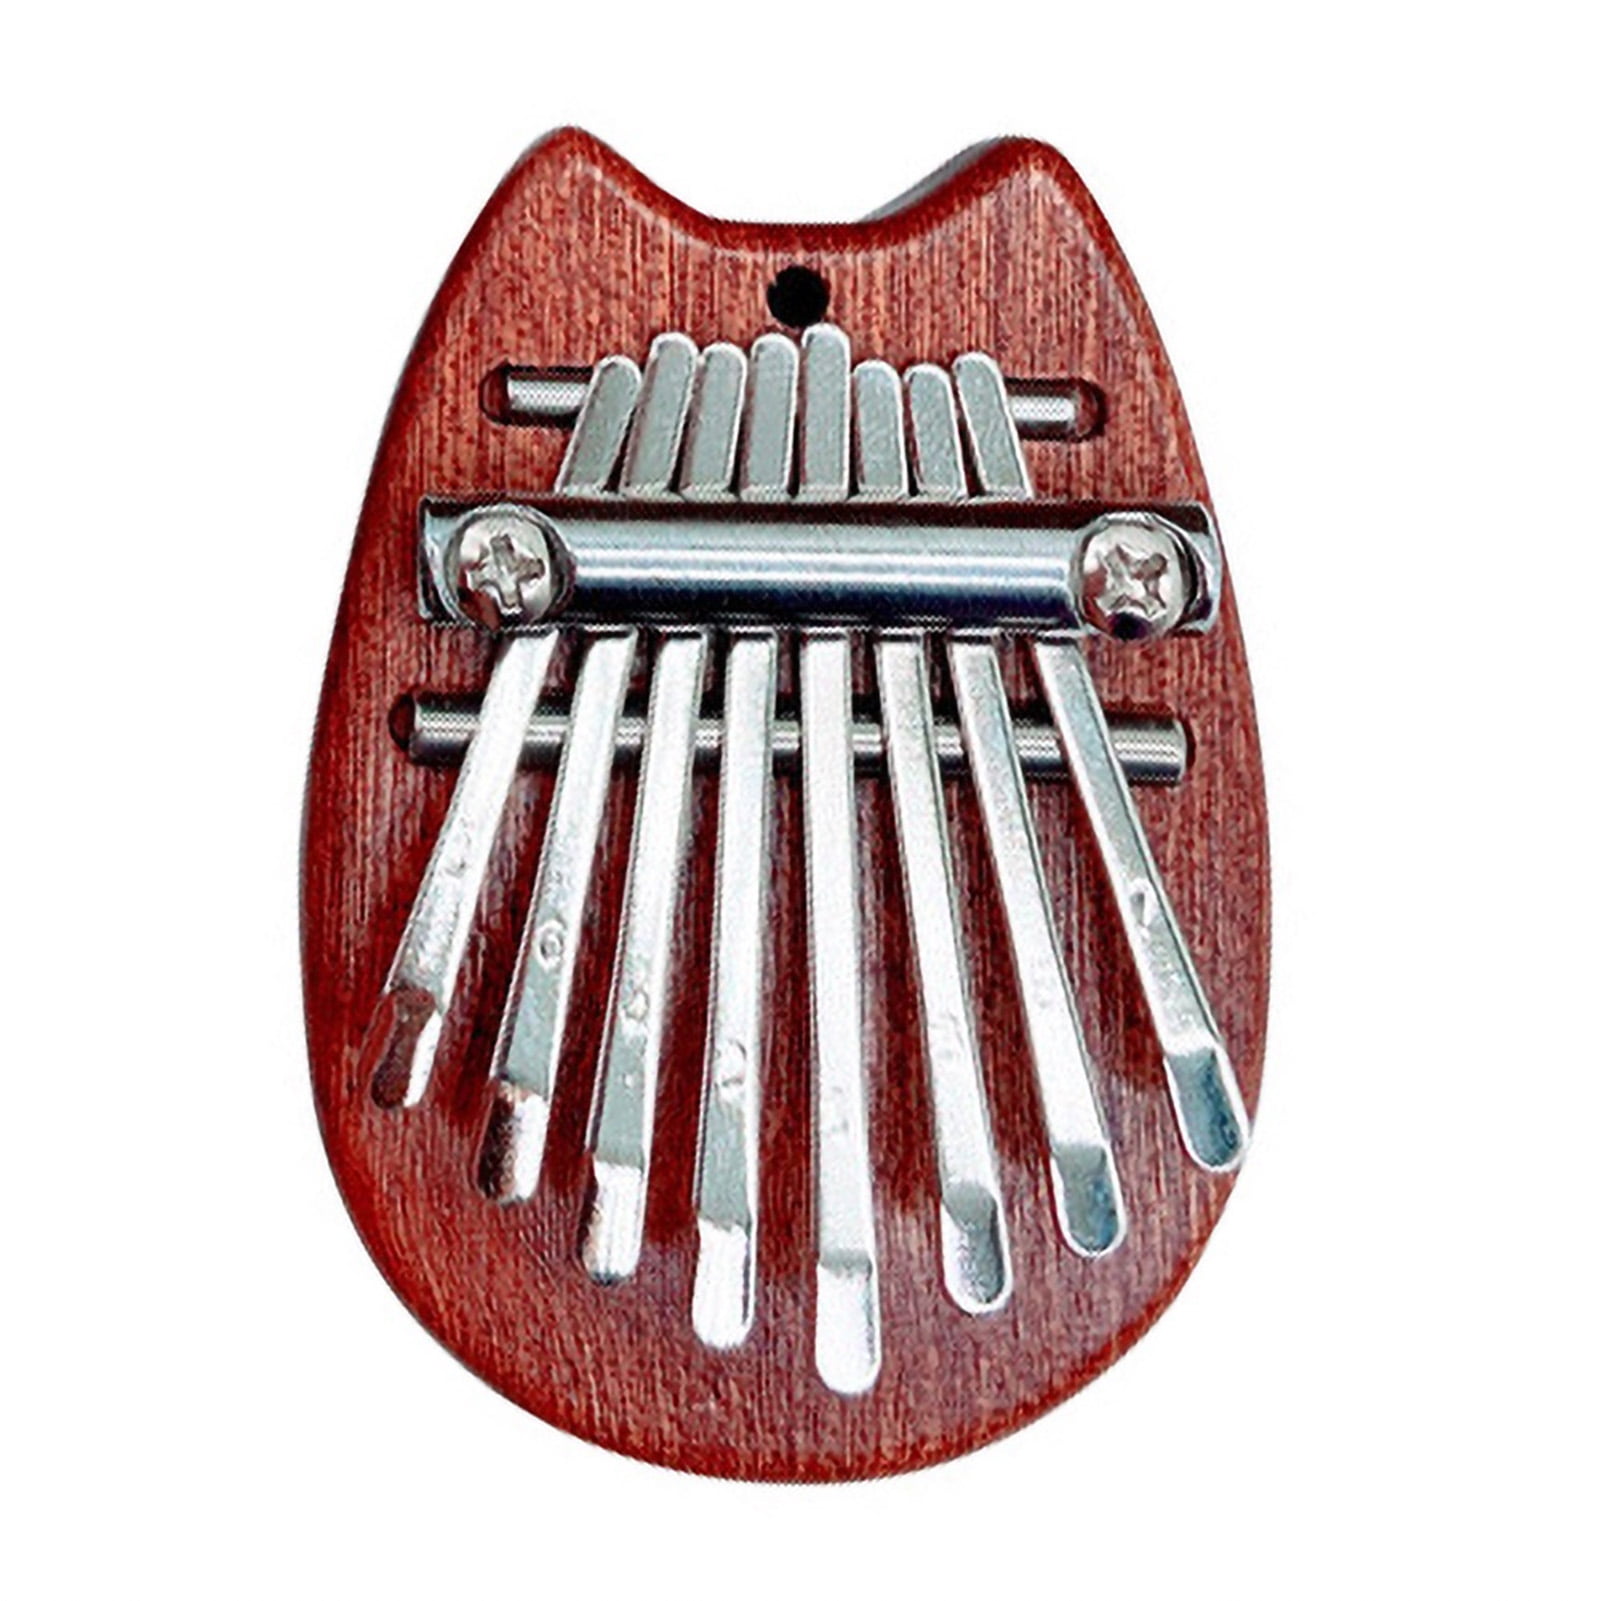 Beginners Kimi Kalimba,Resin Ocean Blue Kalimba,17 Key Whale Flat Board Thumb Piano with Learning Instruction,Wood Finger Thumb Piano Portable Musical Instrument Gifts for Kids Professional 